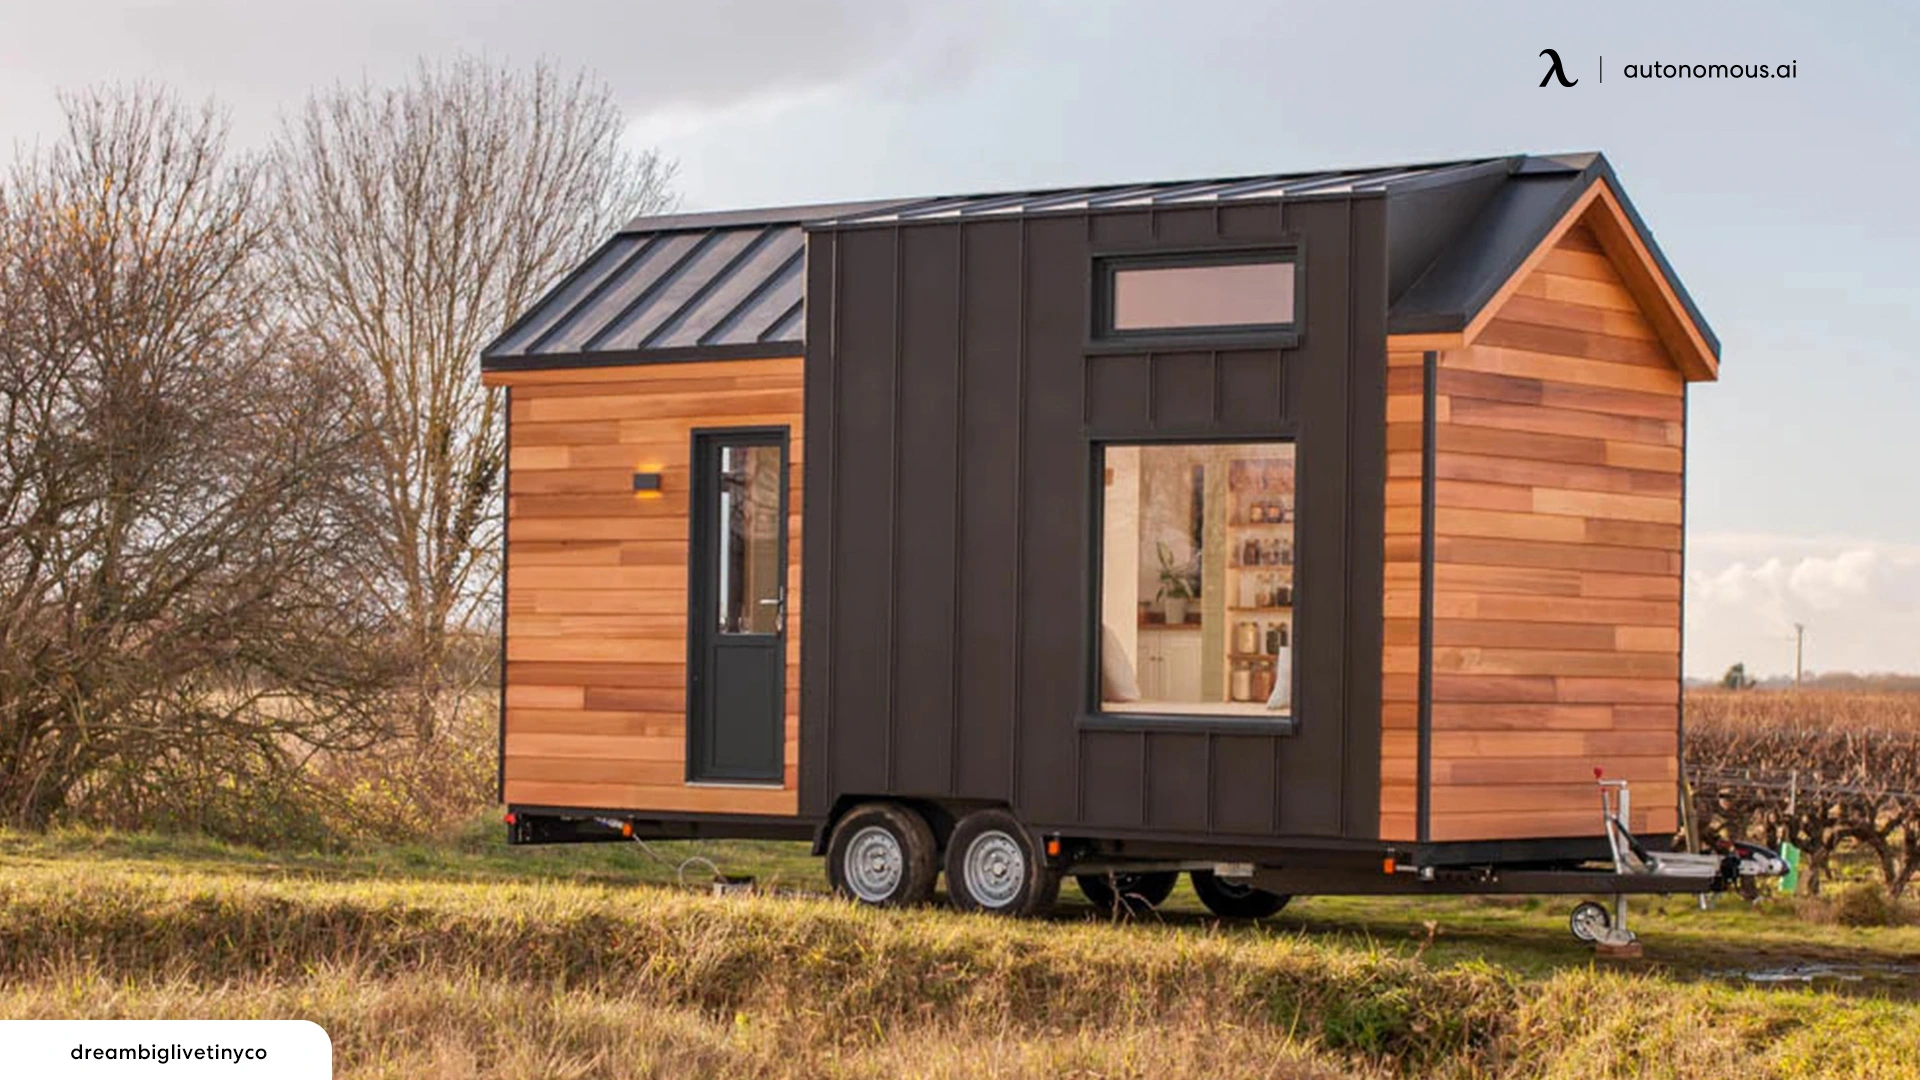 Other Factors That Affect the Interior Height of a Tiny House